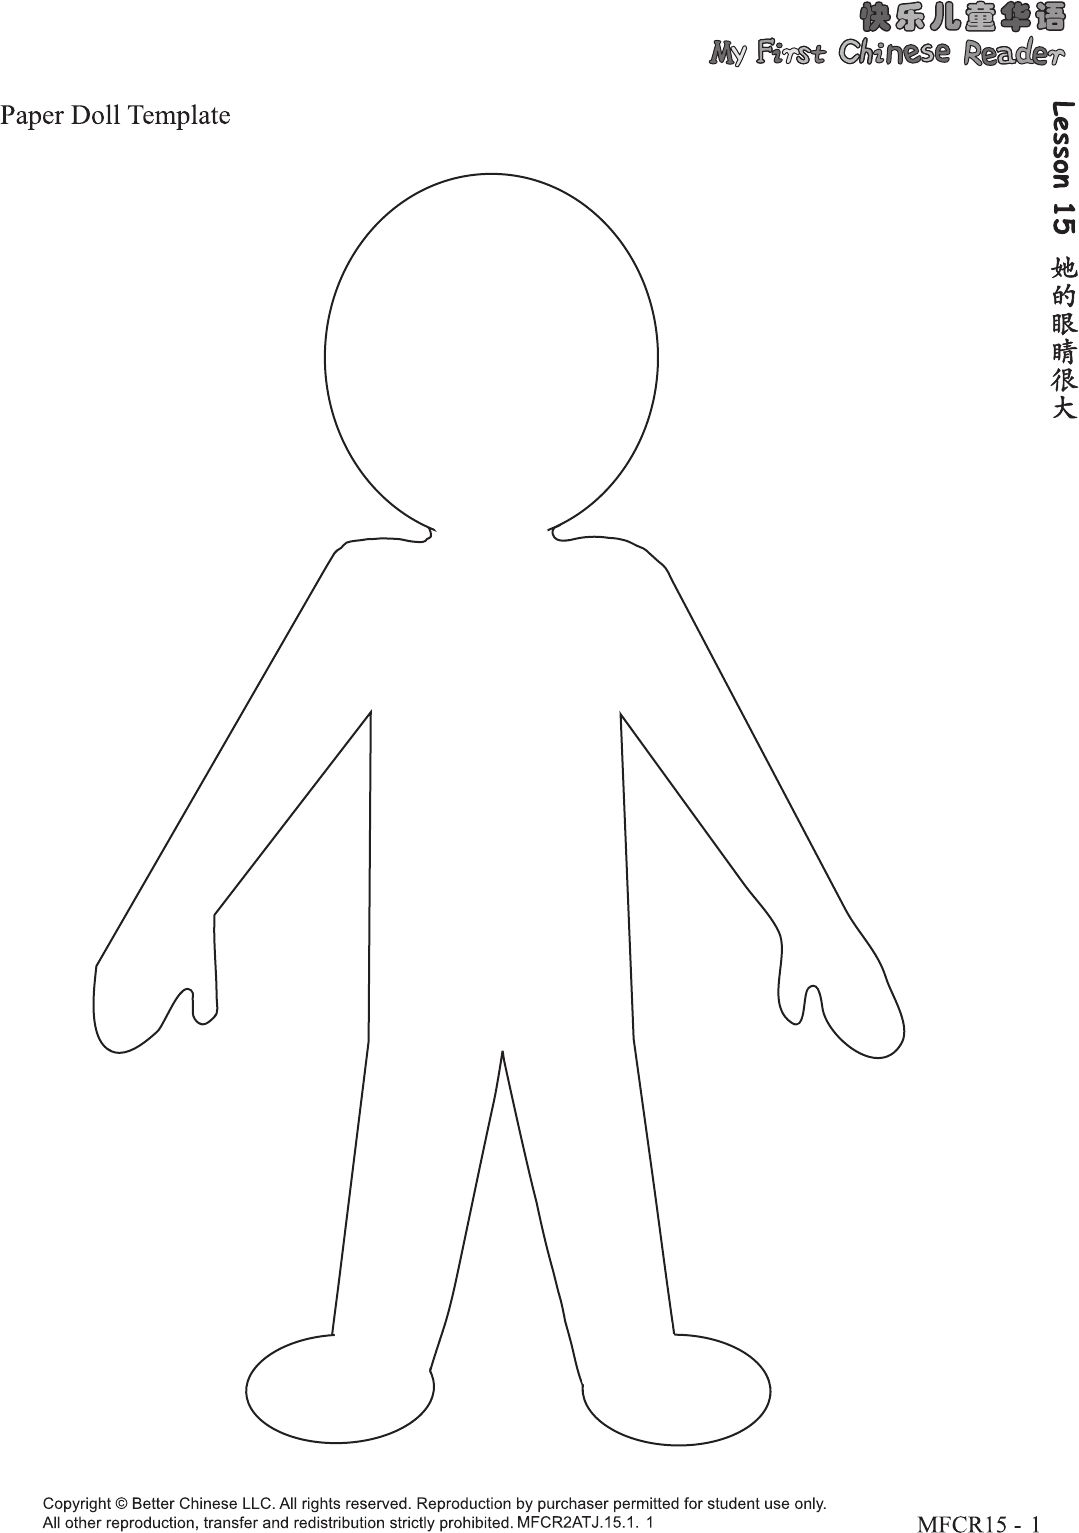 free-printable-paper-doll-template-get-what-you-need